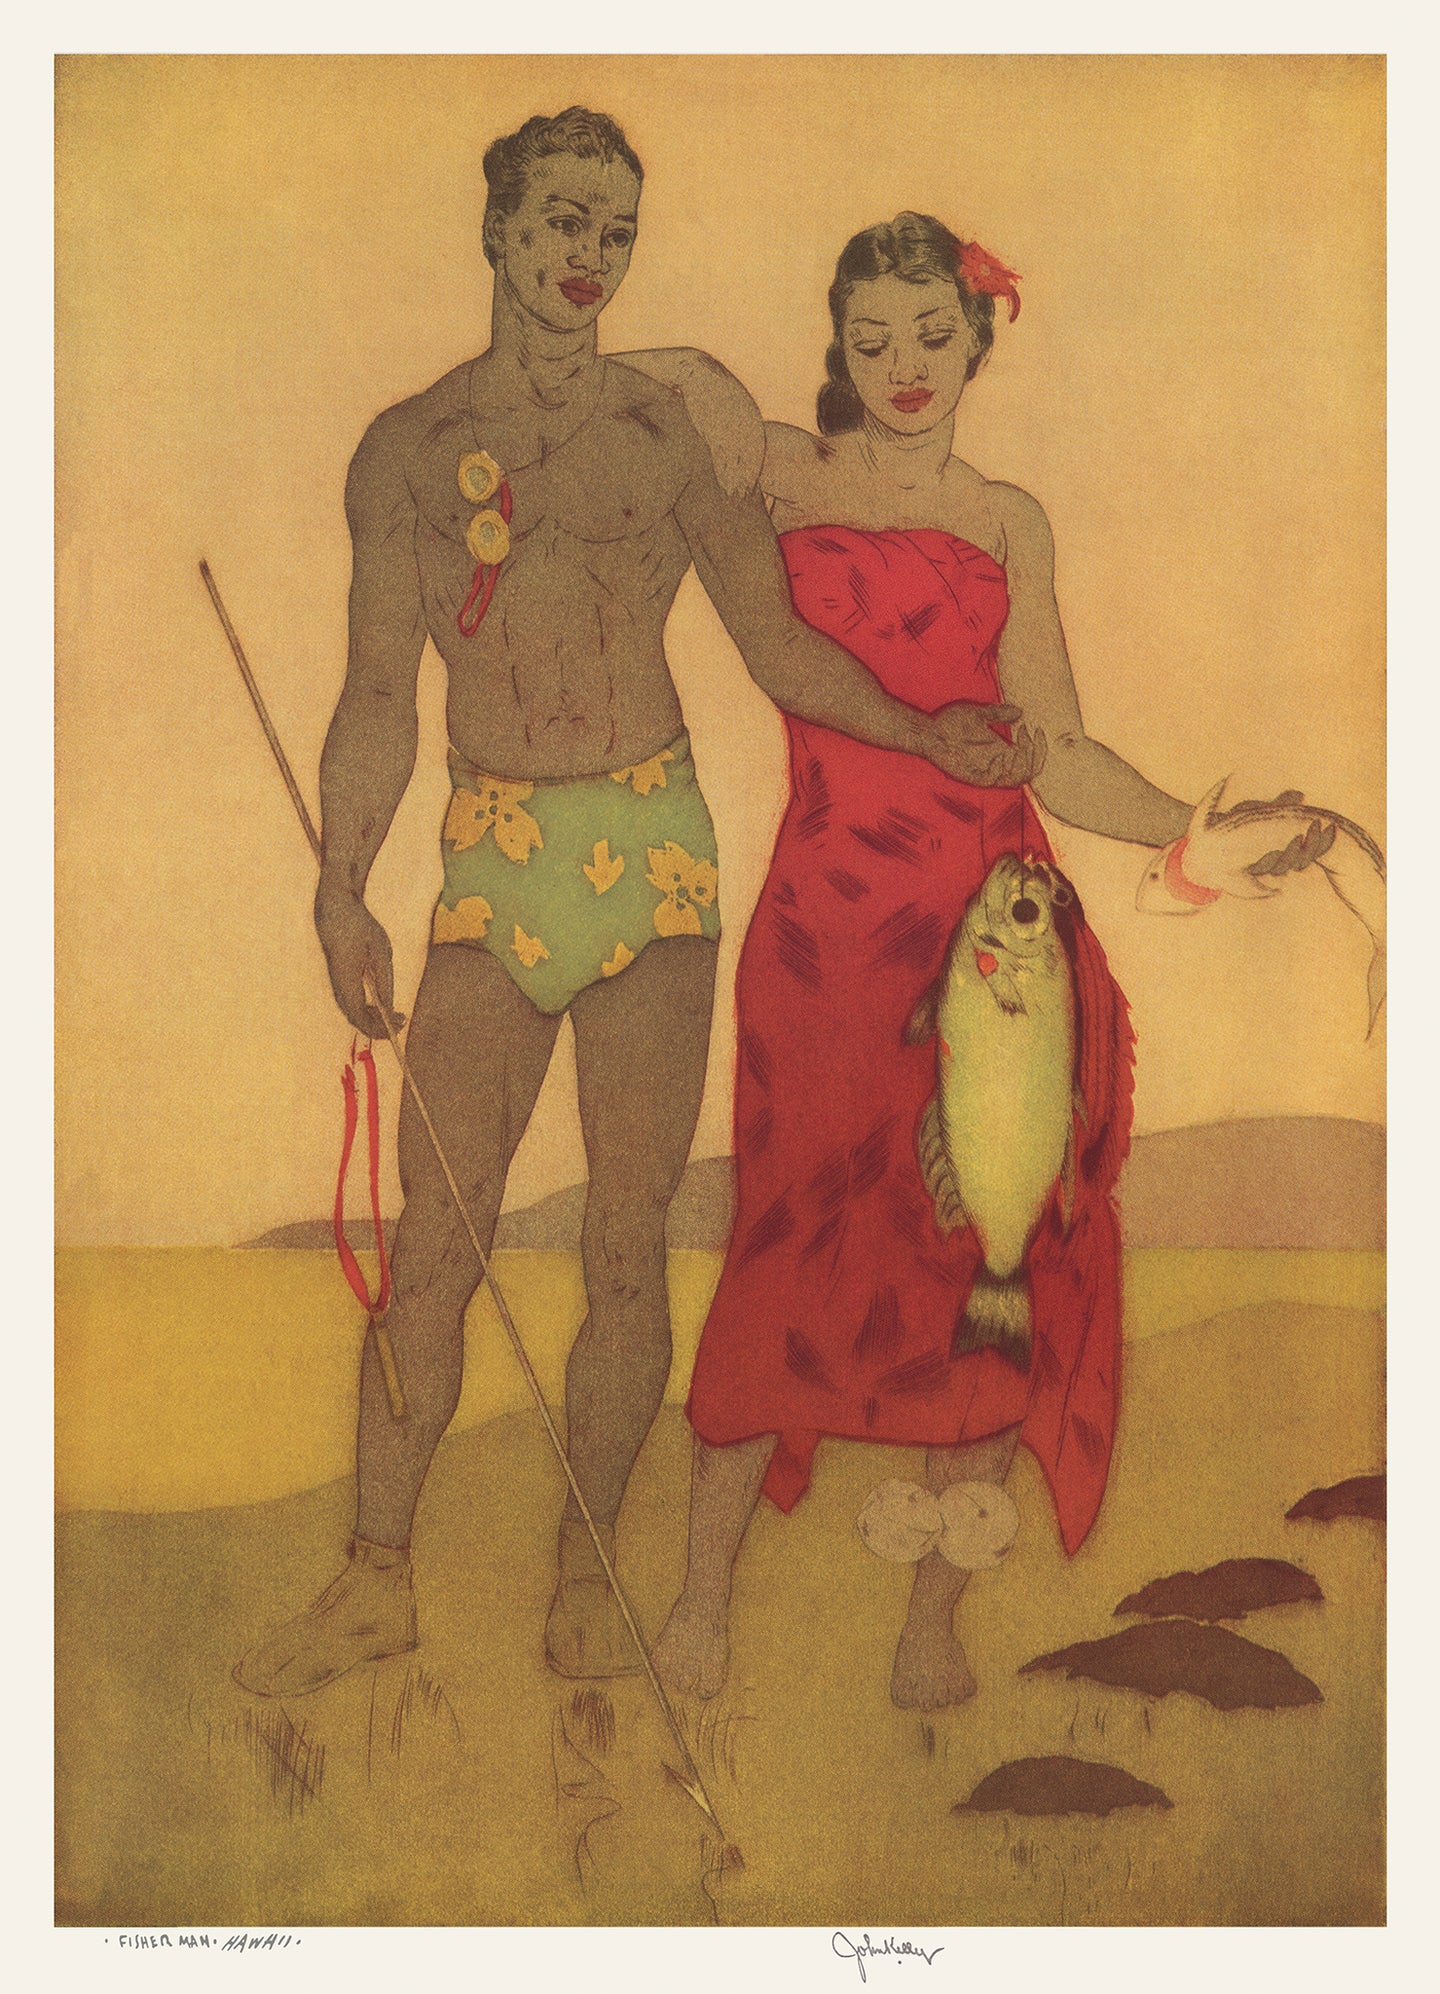 Menu cover art of a native Hawaiian man in shorts holding a fish on a line in front of a native Hawaiian woman in  a red sarong who is also holding a small shark. Artist is John Kelly.